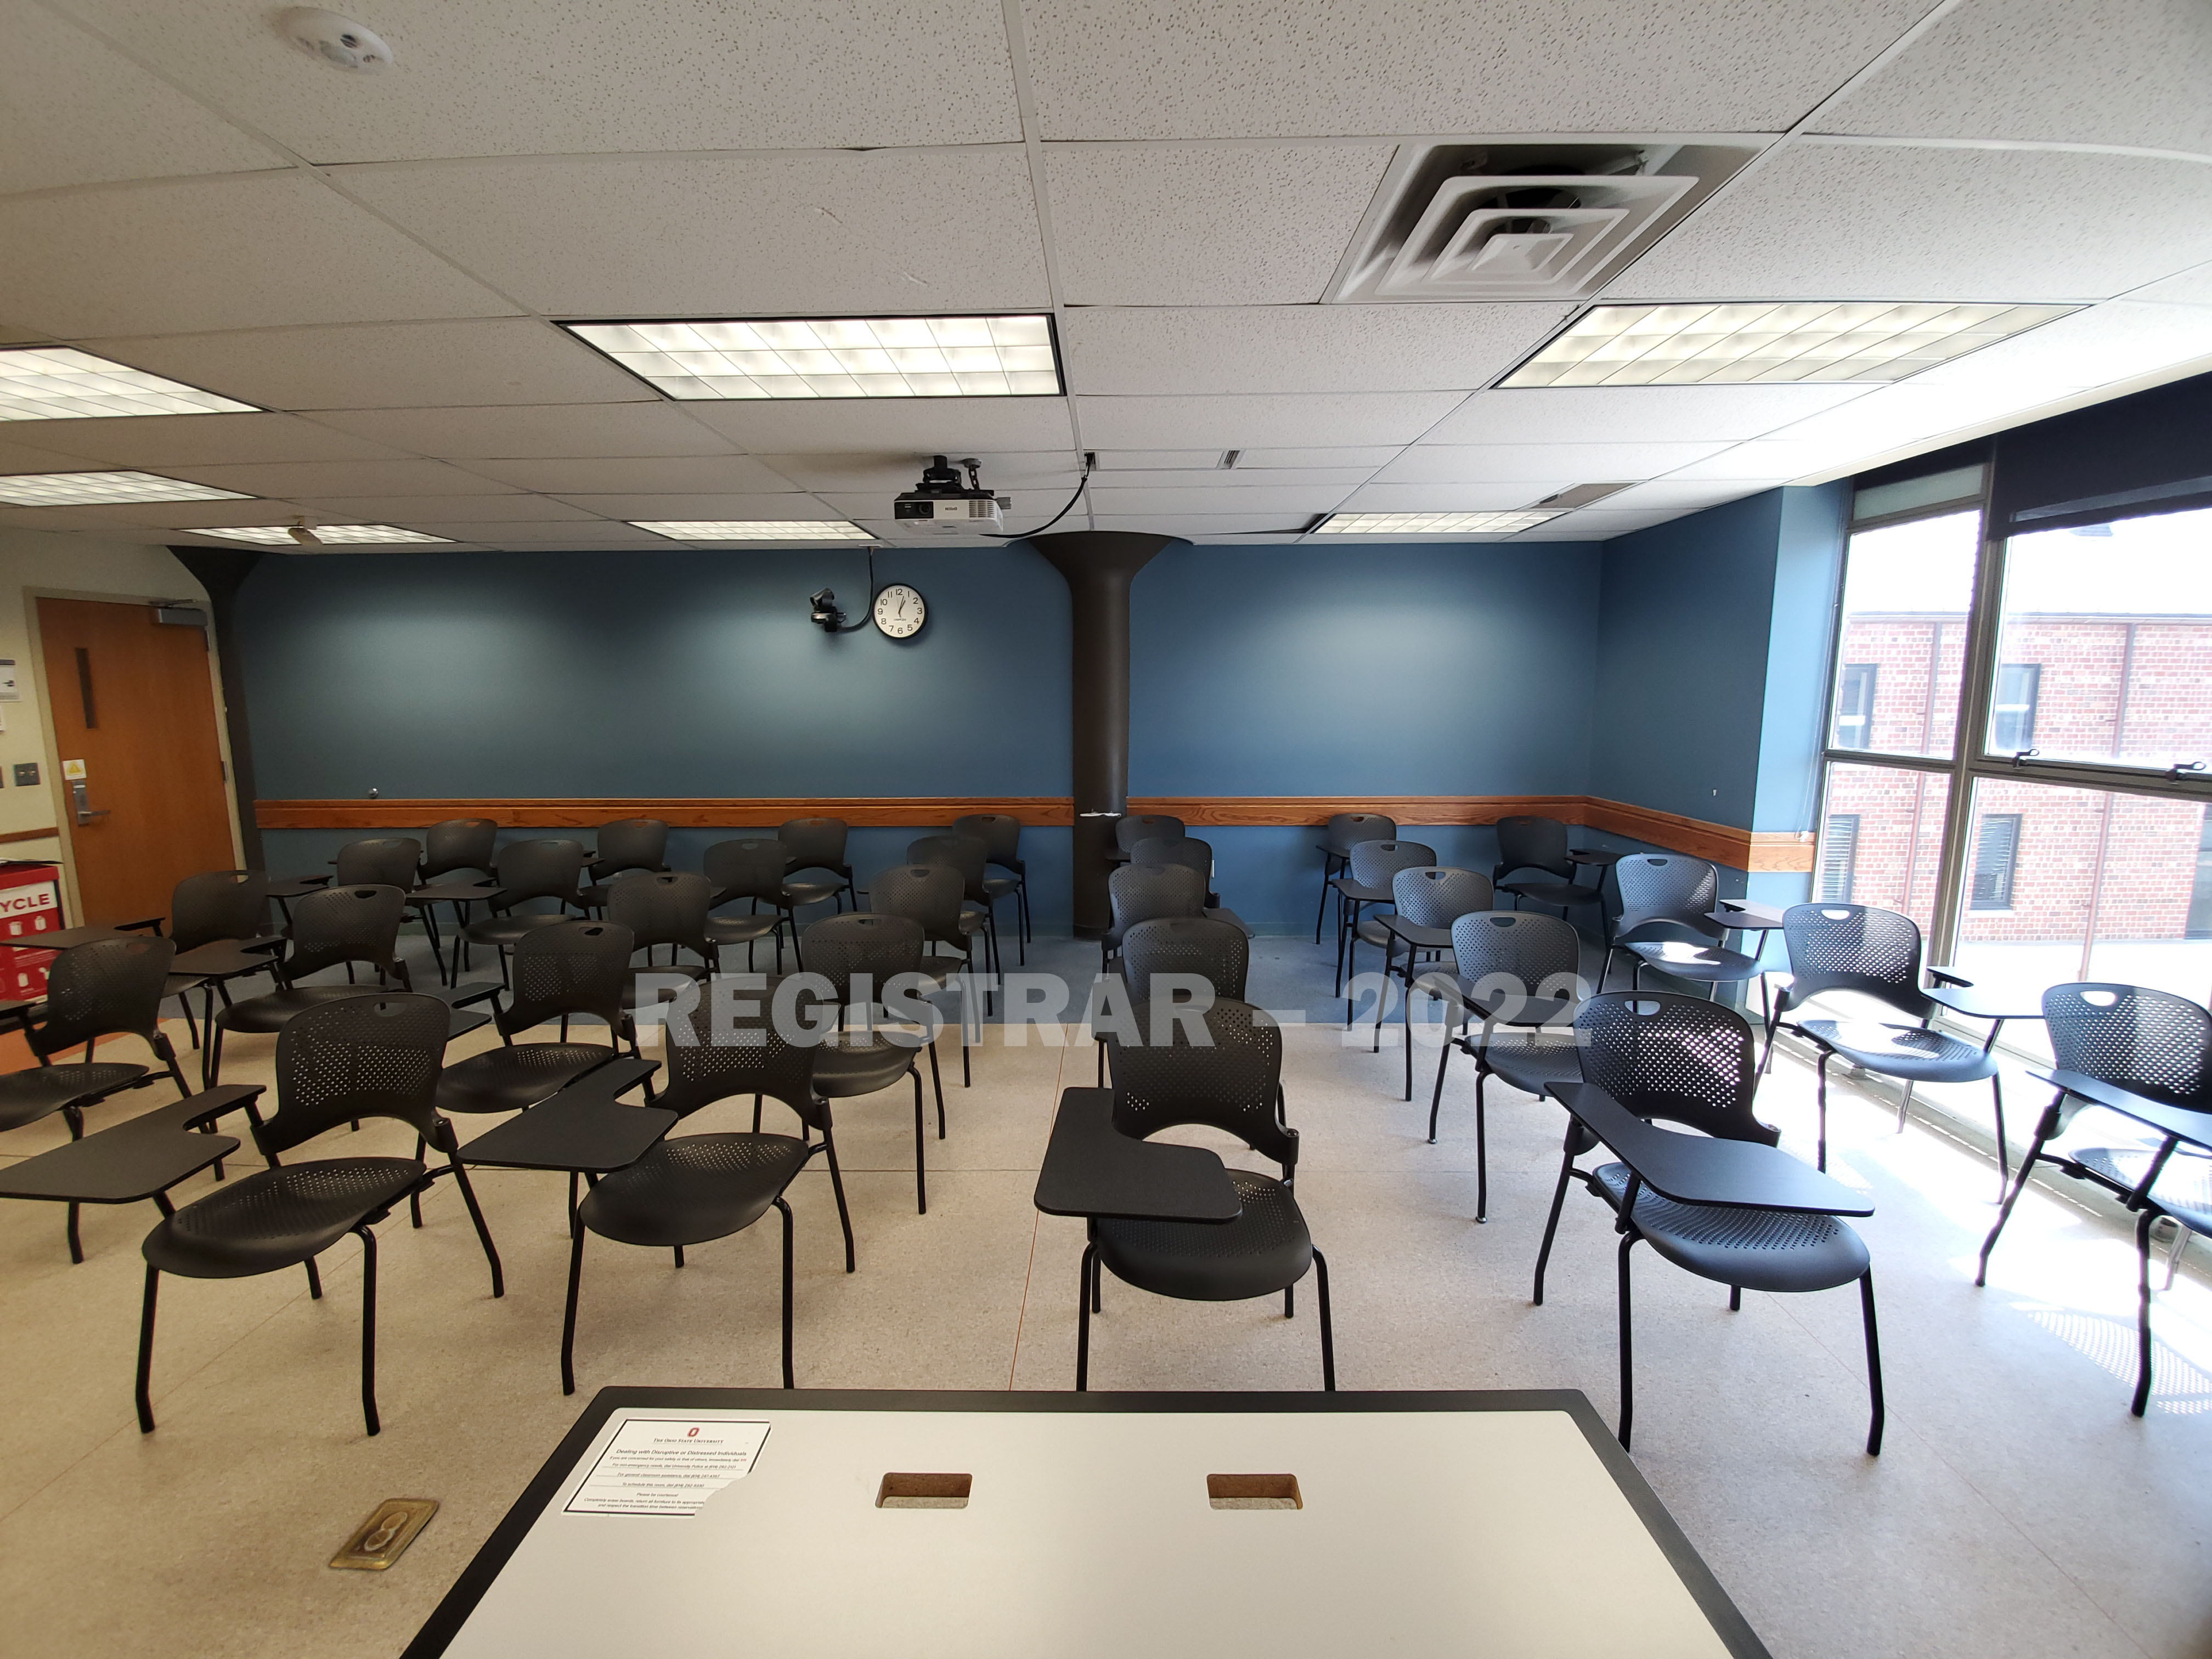 Enarson Classroom Building room 358 ultra wide angle view from the front of the room